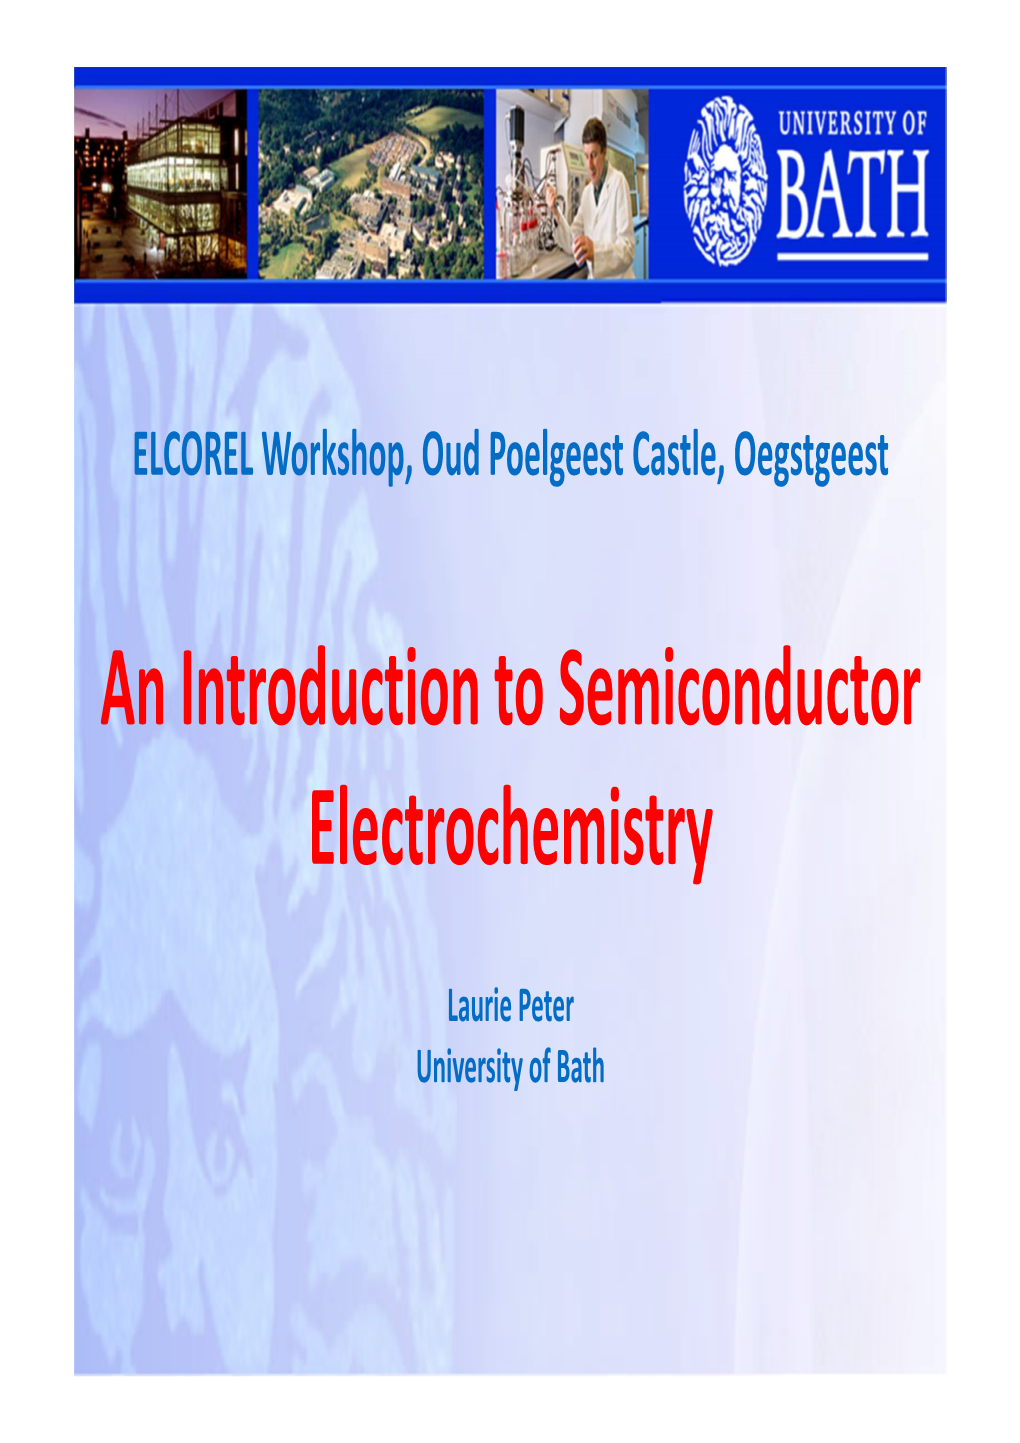 An Introduction to Semiconductor Electrochemistry